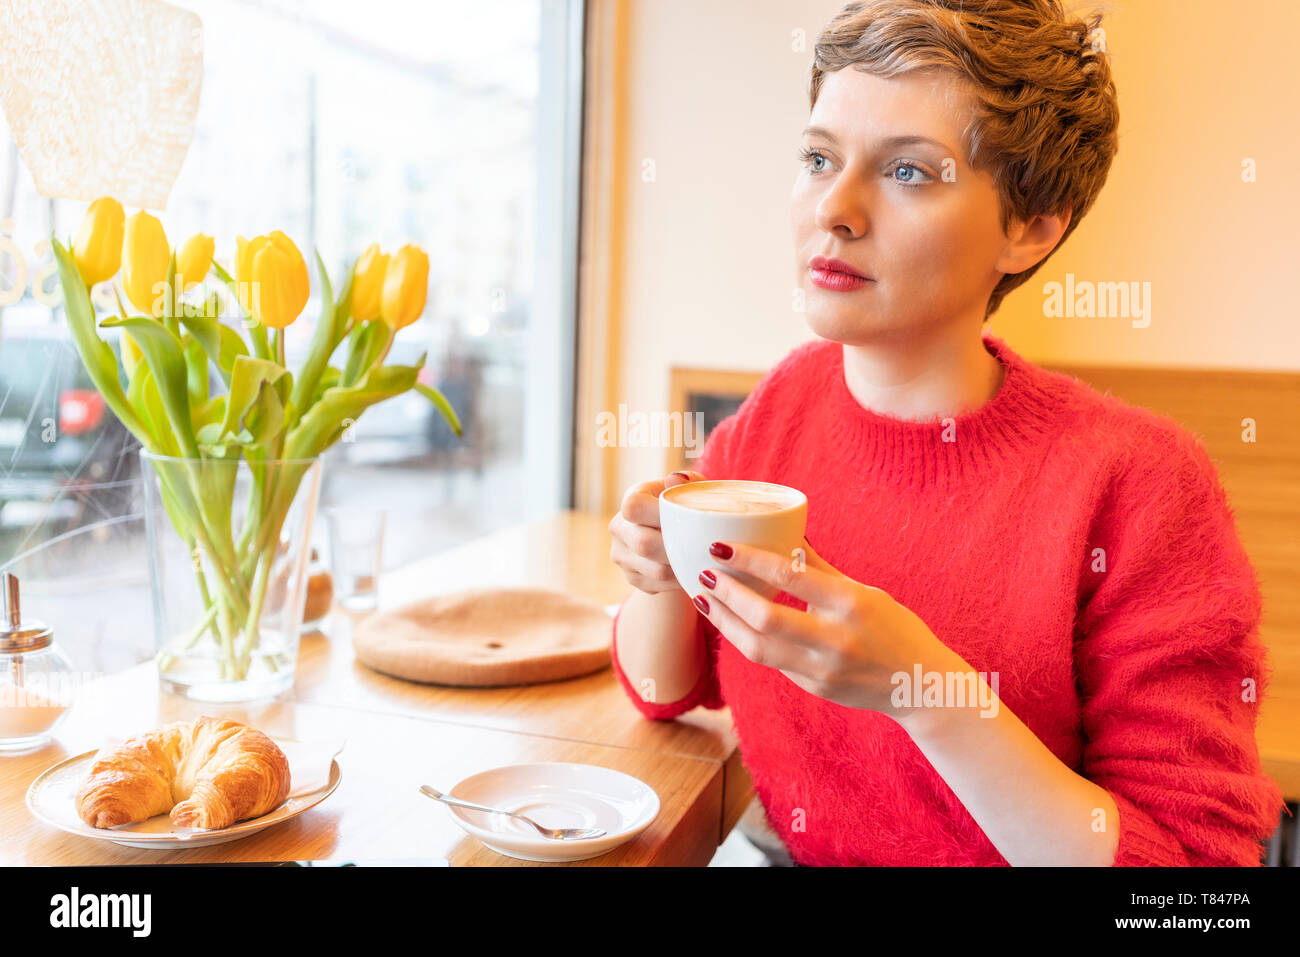 Mid adult woman with short blond hair looking through cafe window Stock Photo